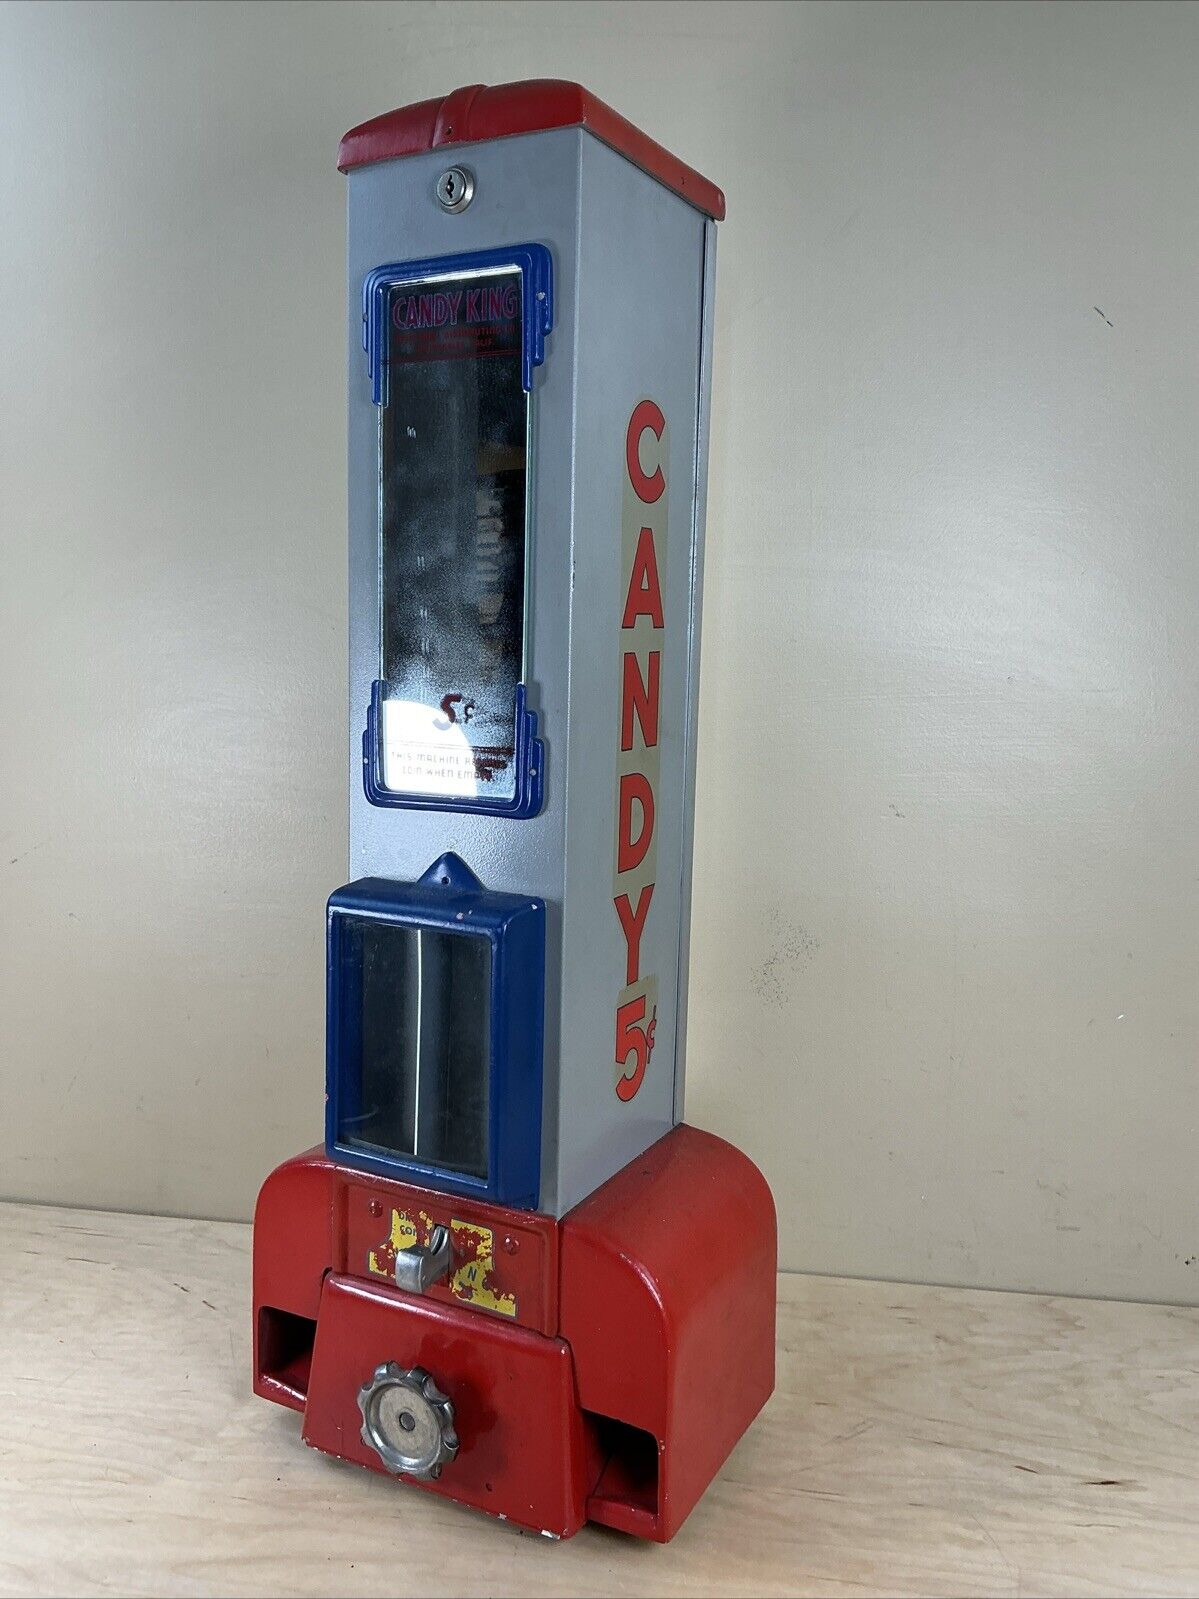 Vintage 1940’s 5c Candy-King 2 Compartment Gum Candy Vending Machine Works